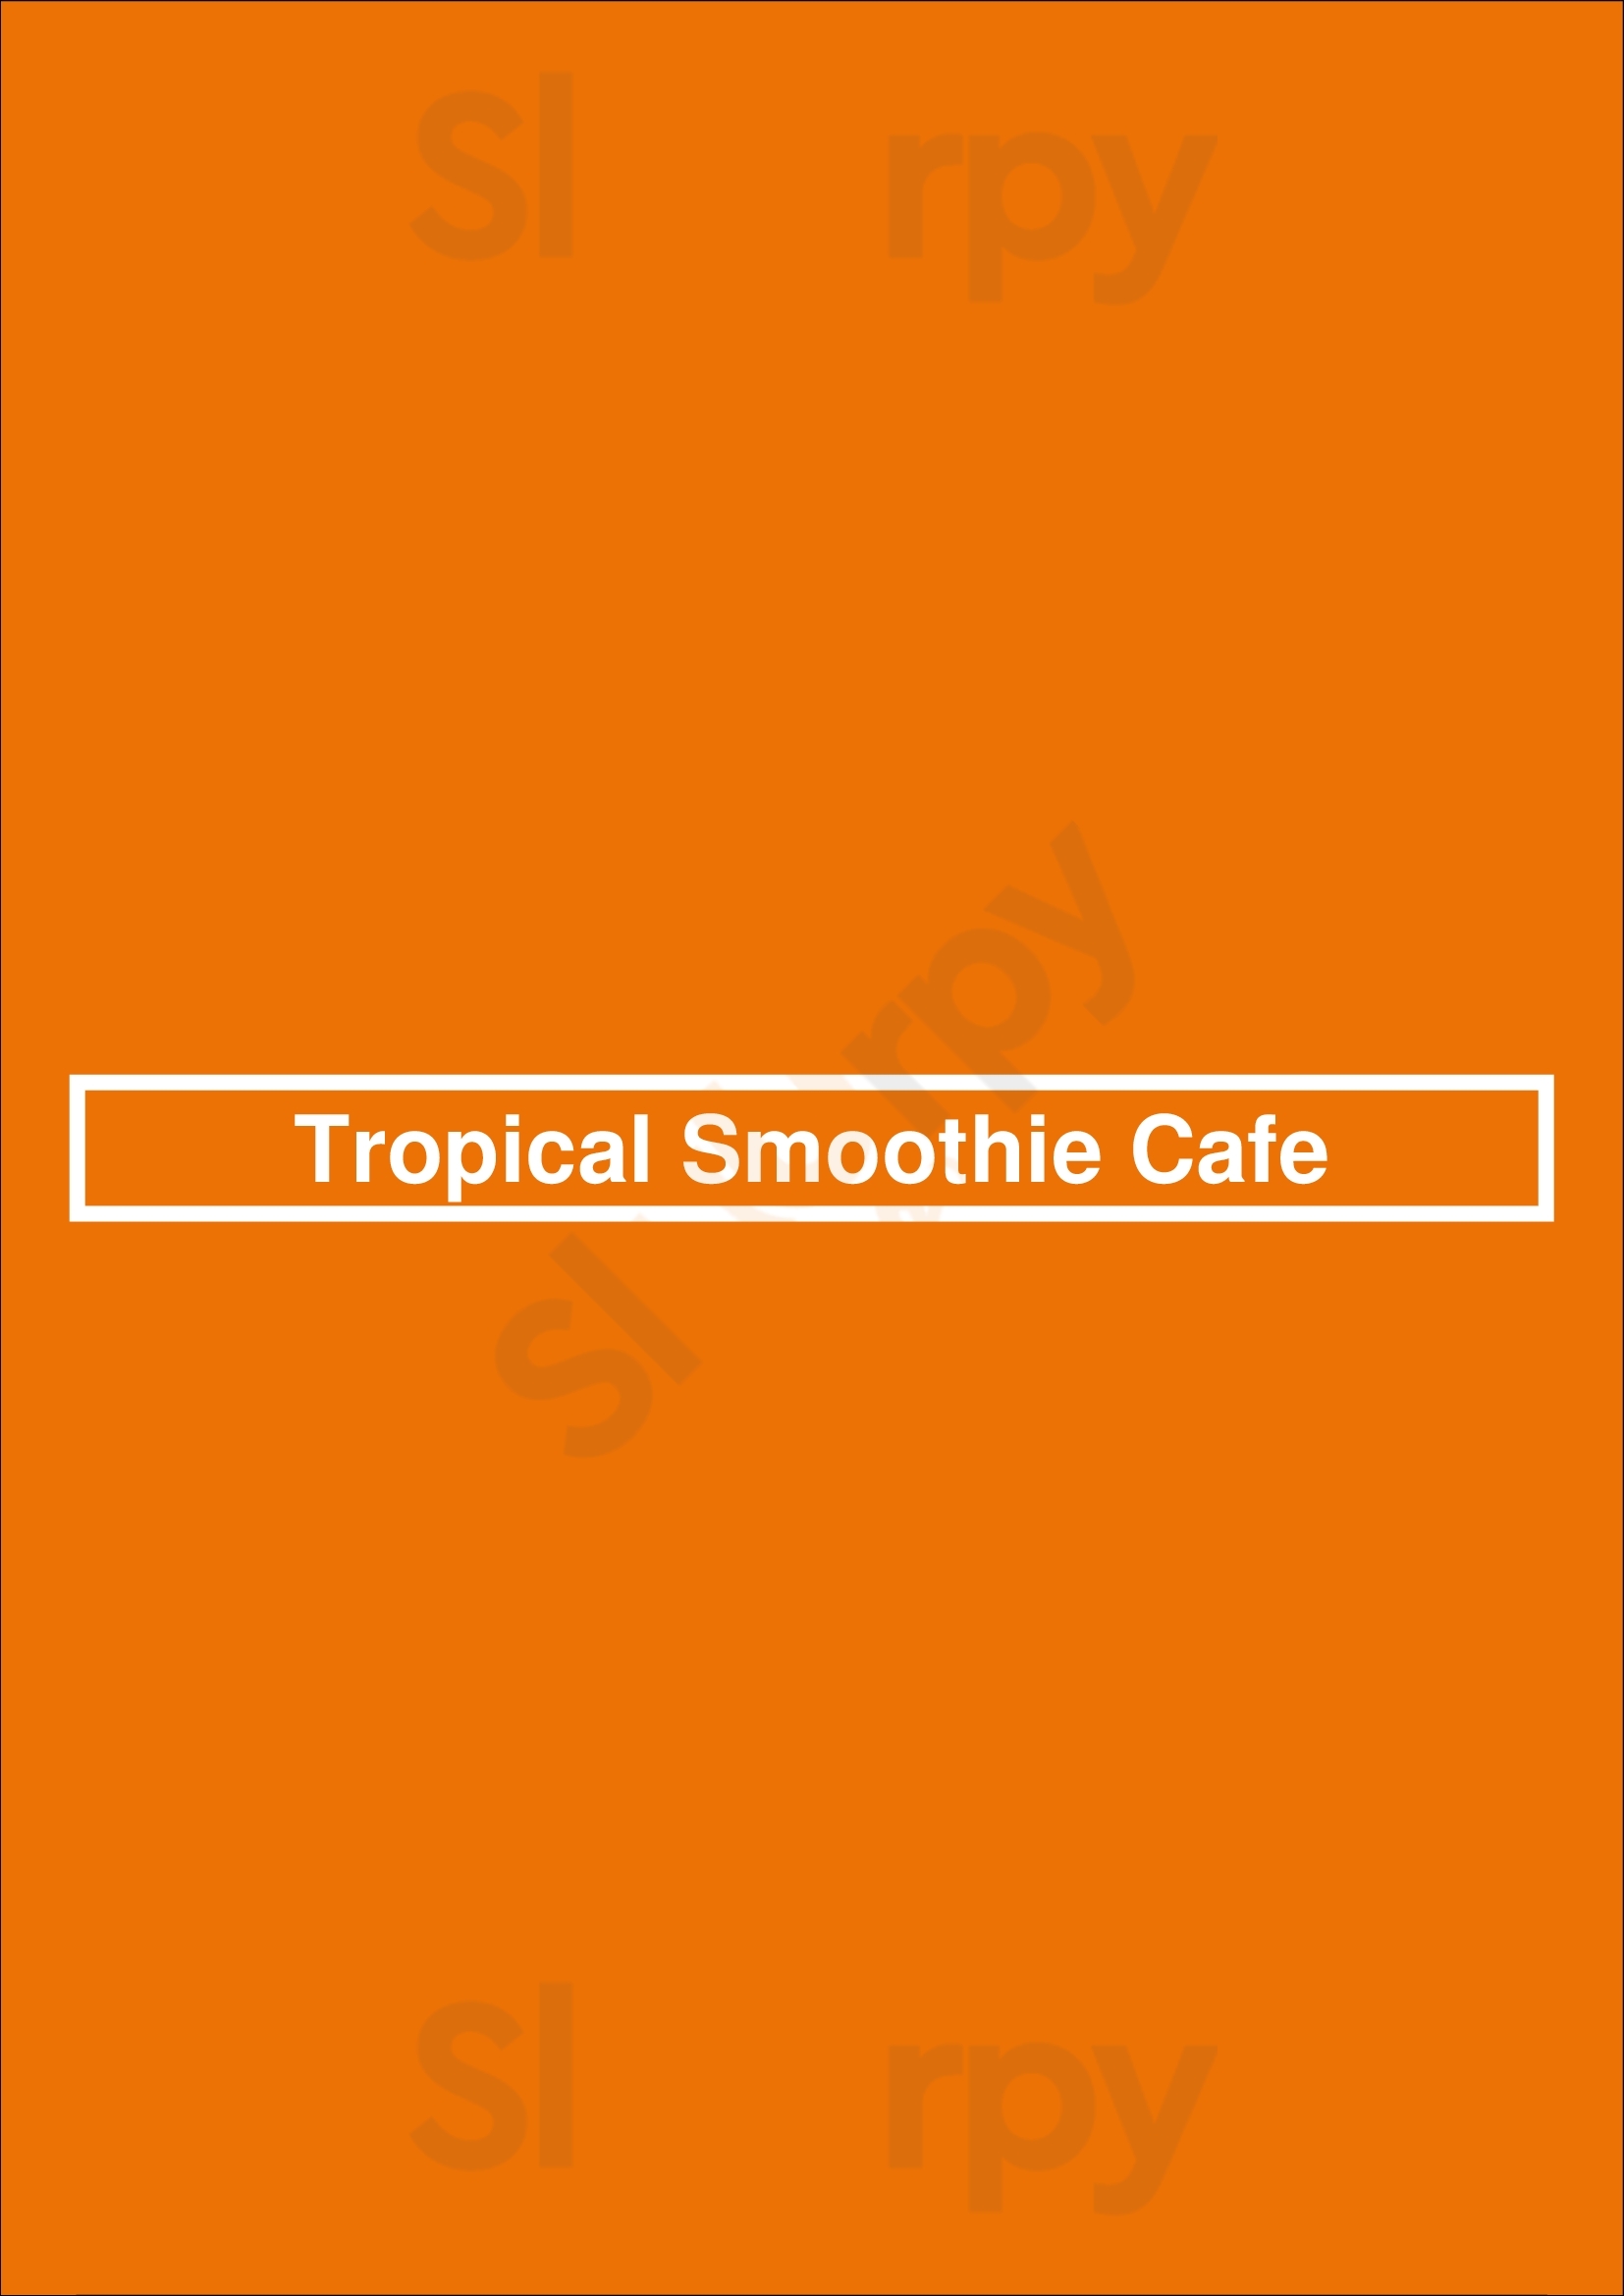 Tropical Smoothie Cafe Fort Myers Menu - 1